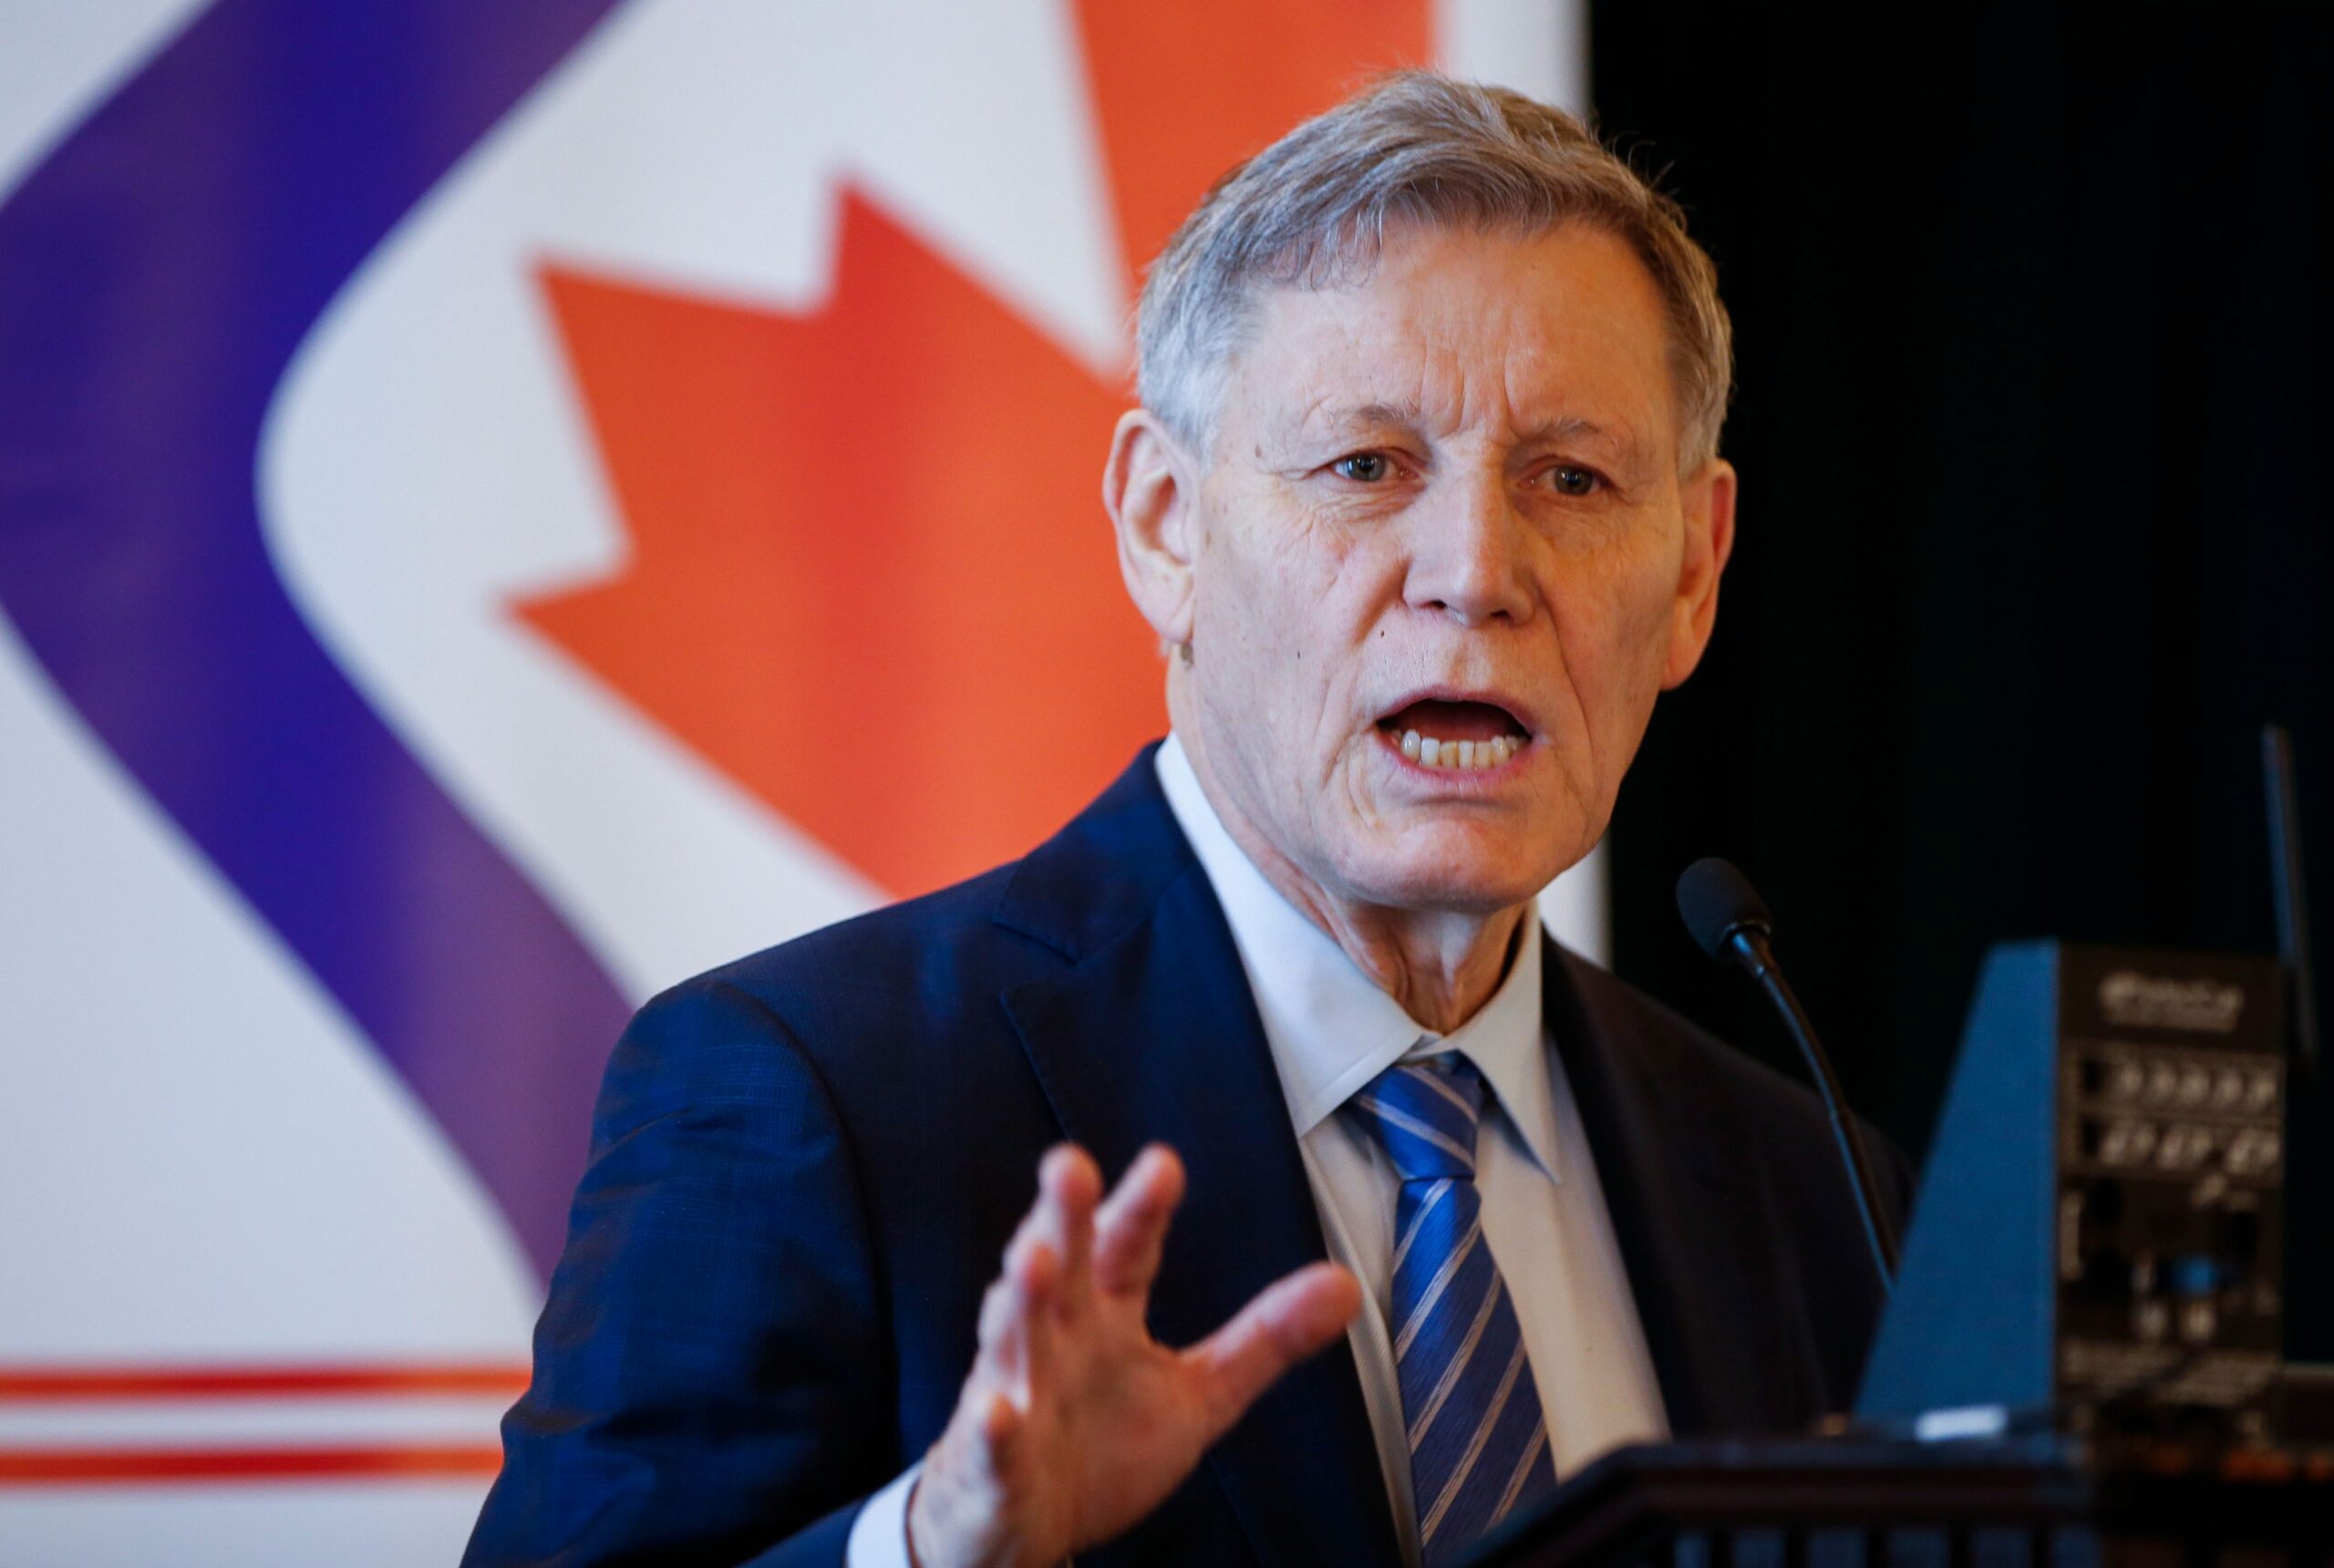 Terry Duguid, Parliamentary Secretary to the Minister of Environment and Climate Change speaks at a Red River Basin Commission event wearing a blue suit and tie